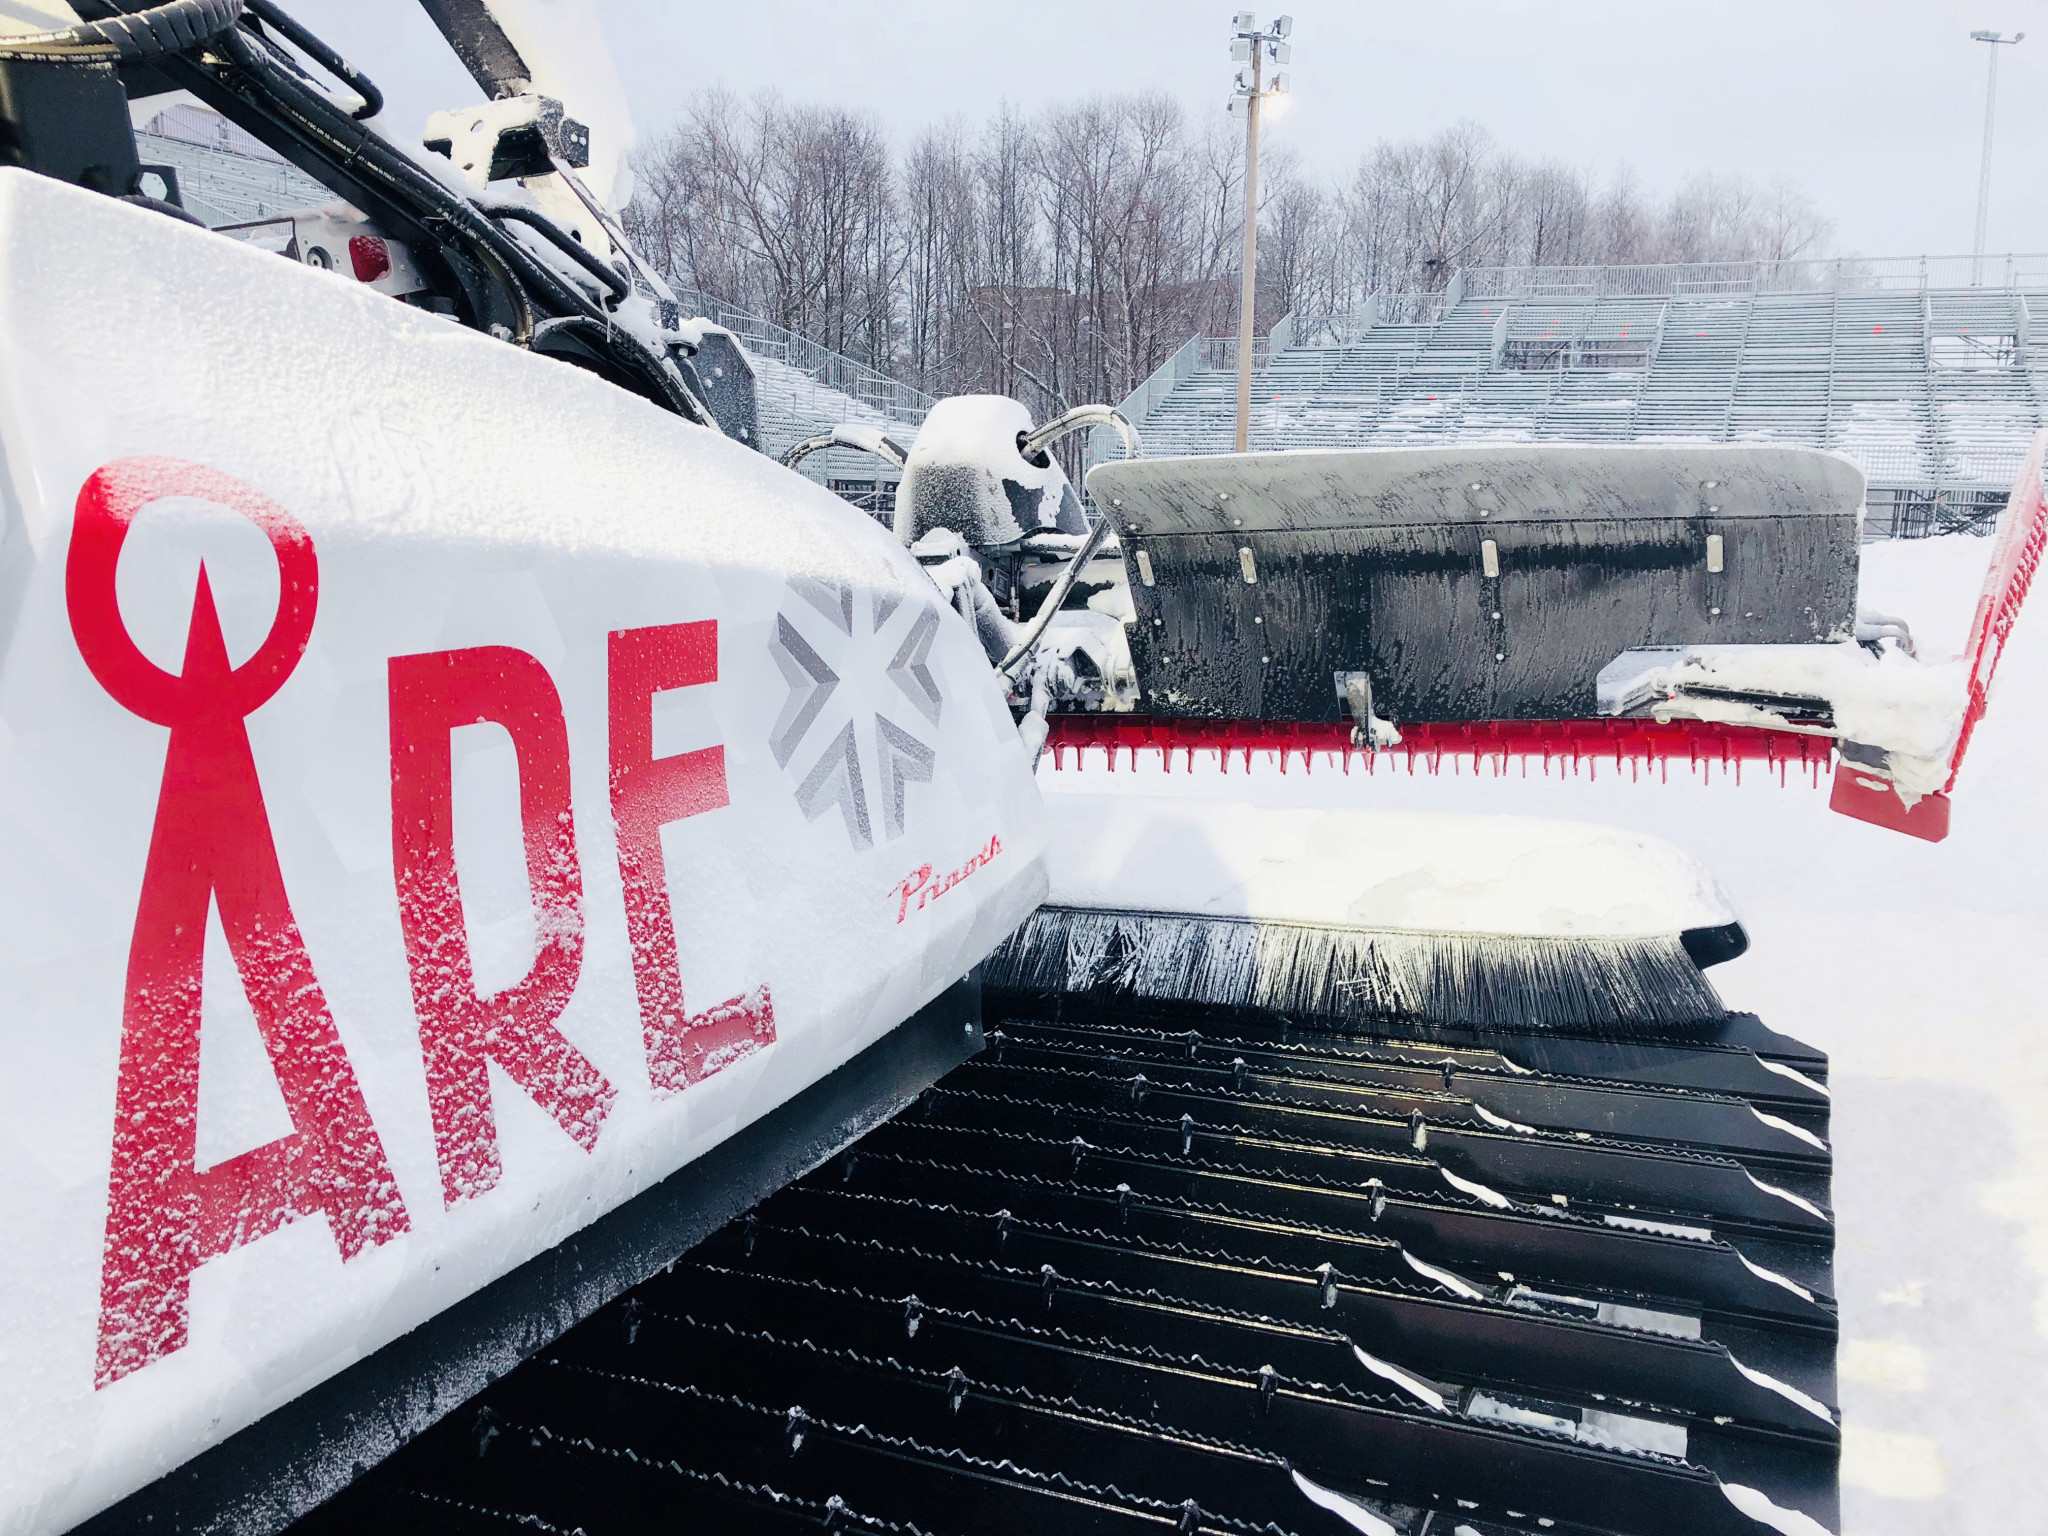 Åre 2019 has been working hard on recycling for next year's FIS Alpine World Ski Championships ©Åre 2019